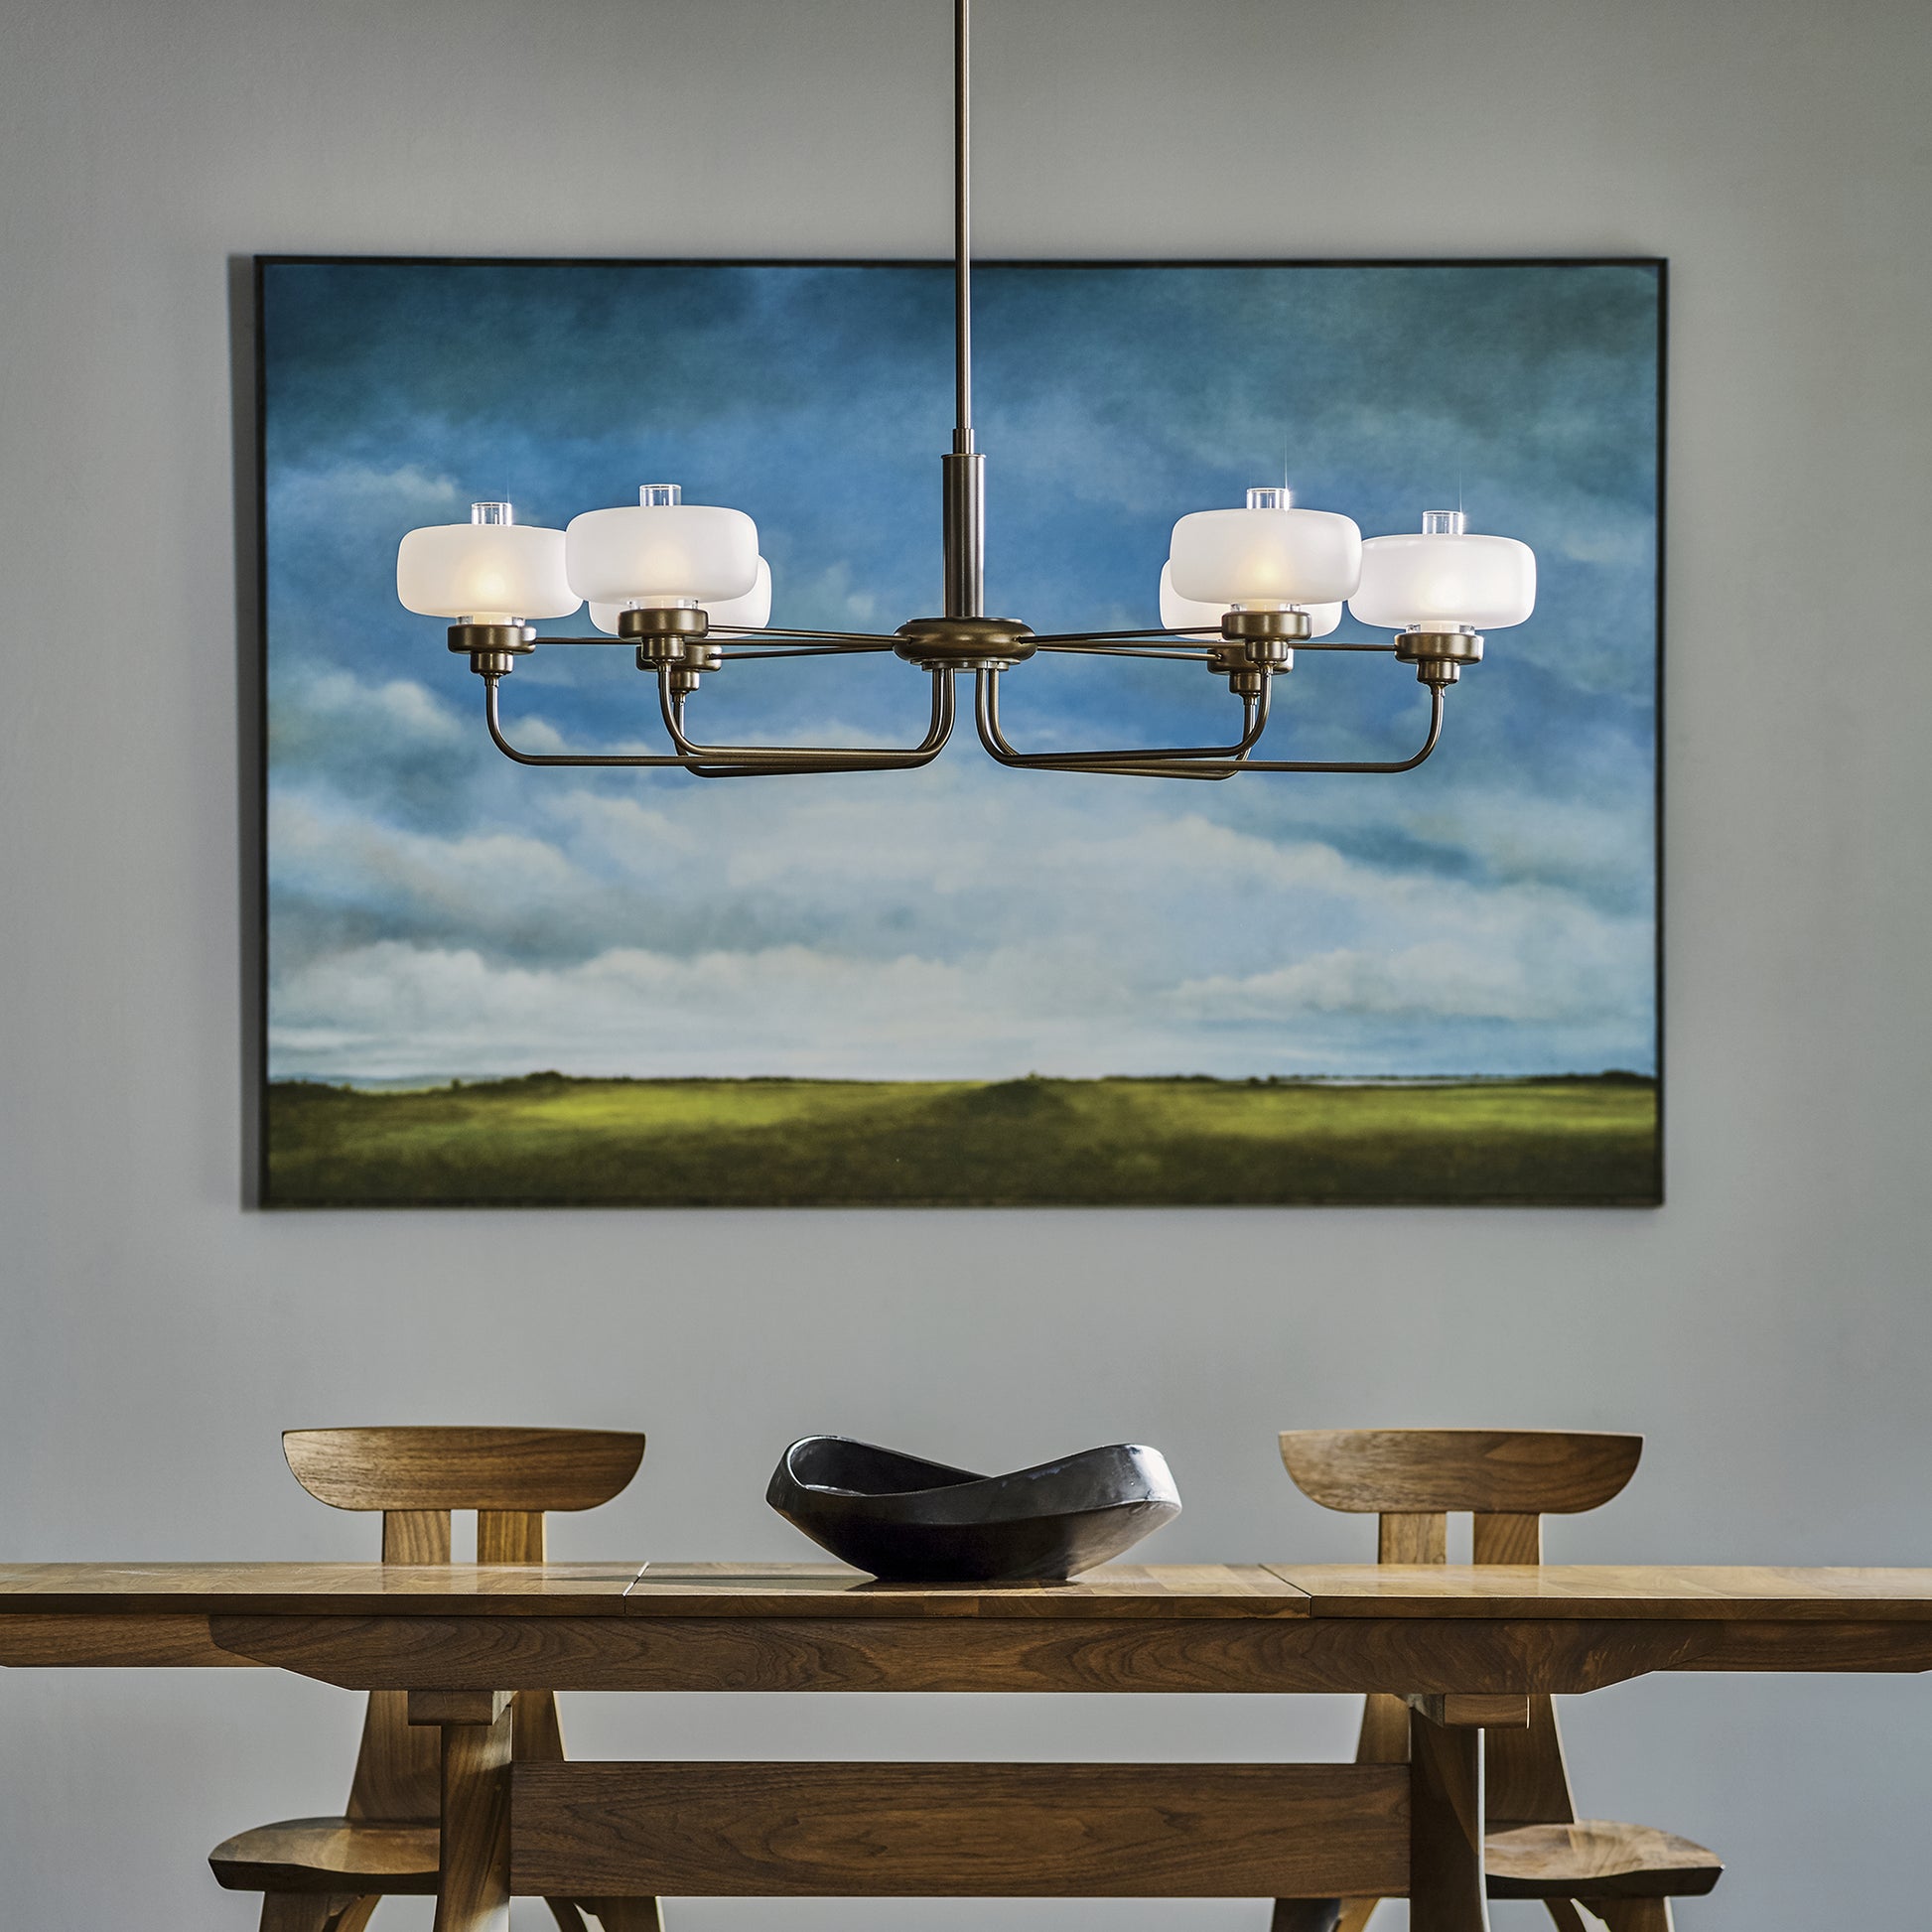 A dining room with a Hubbardton Forge Nola Pendant lighting fixture hanging above a table and chairs, adorned with a beautiful painting.